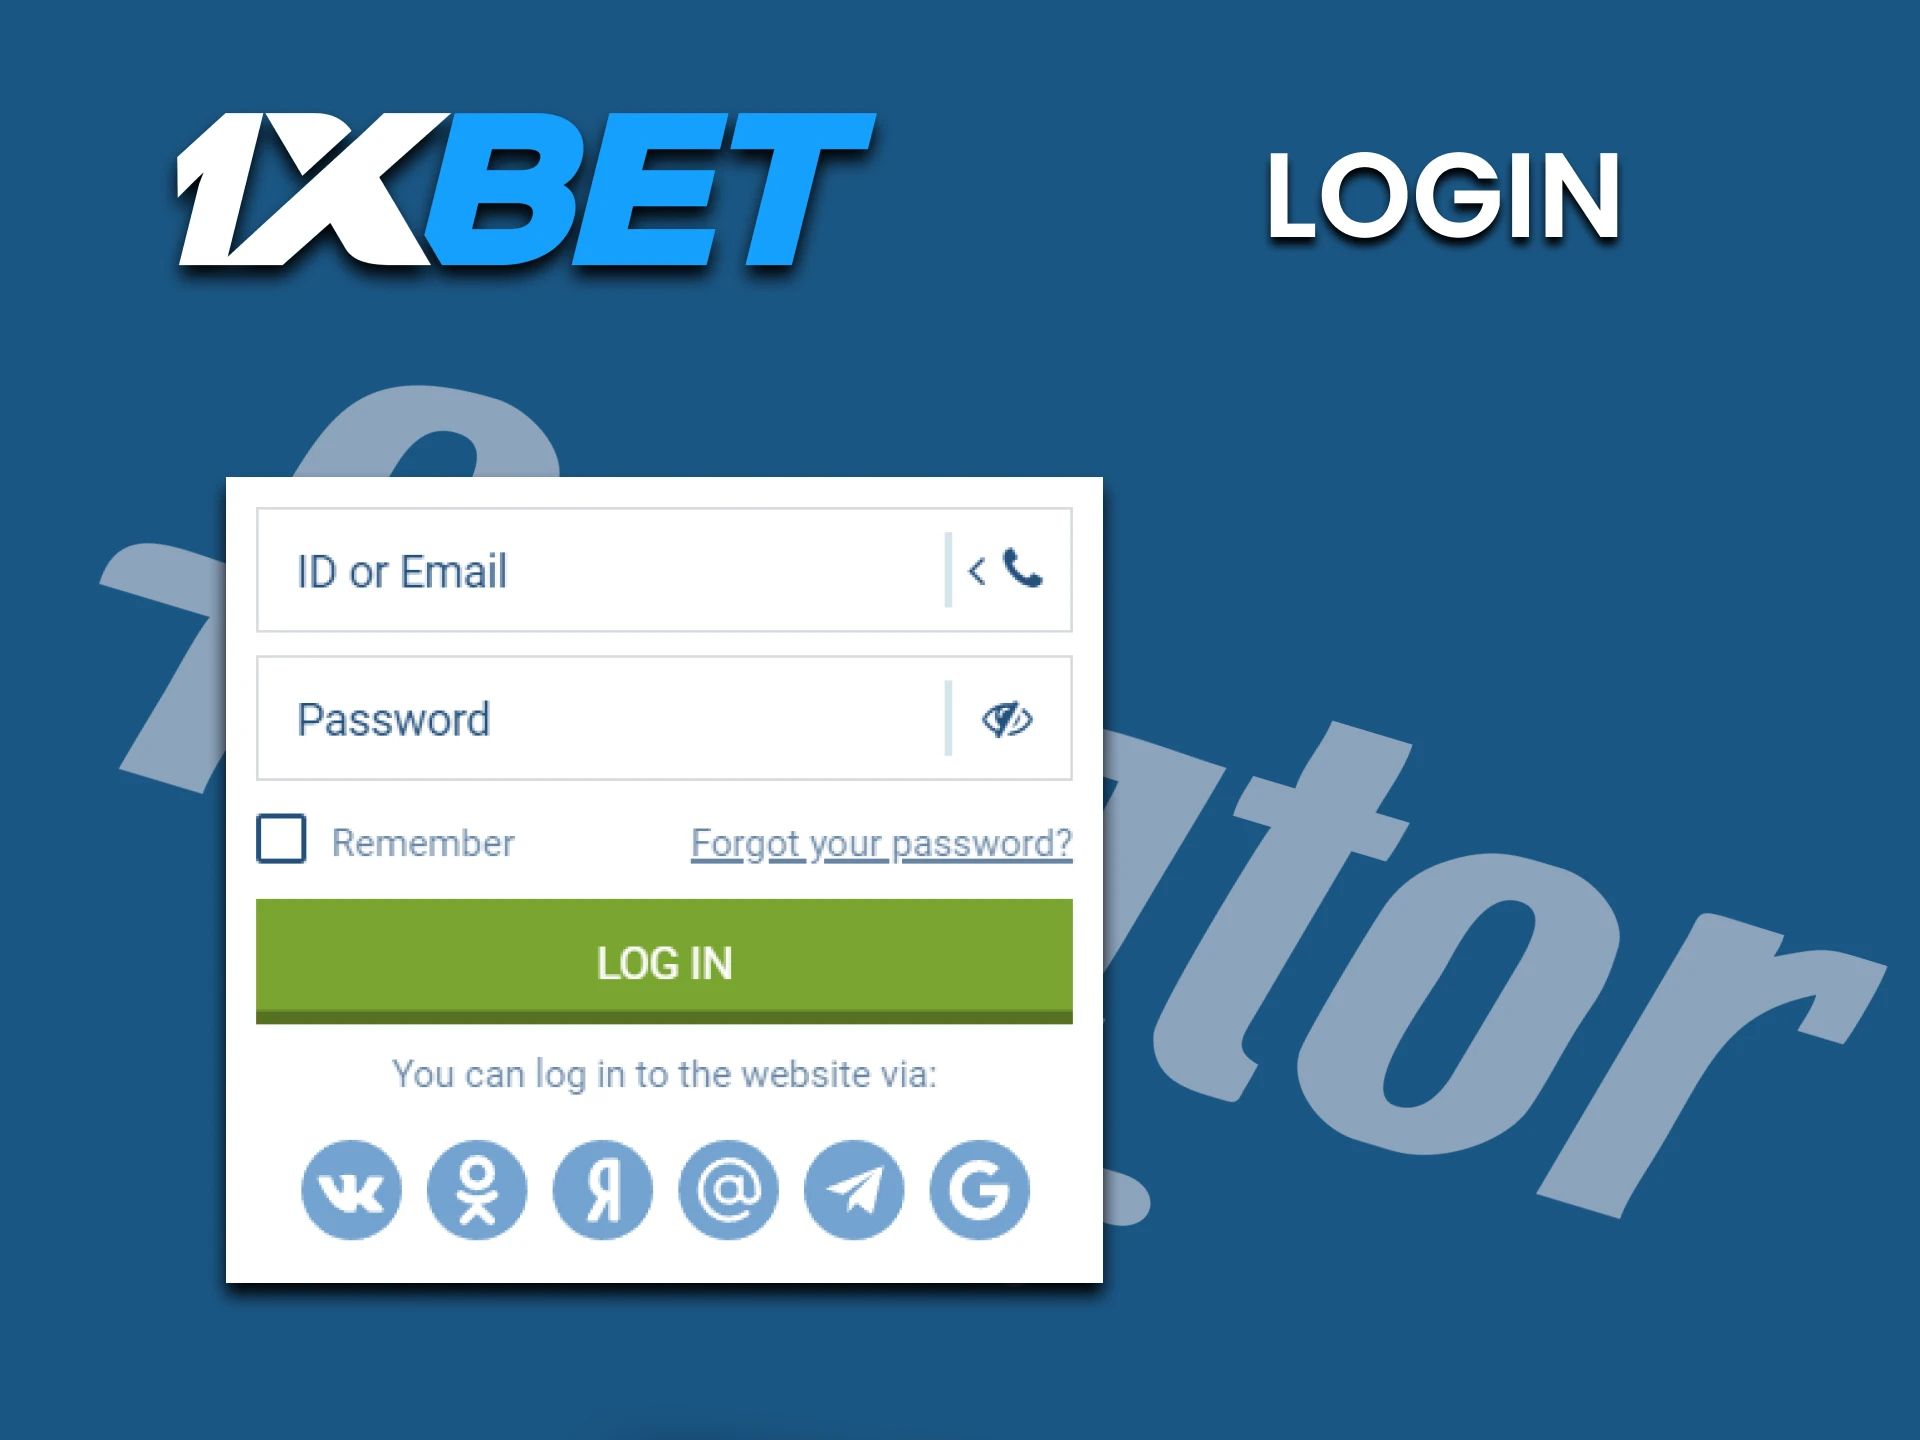 By logging into your personal 1xbet account you can play Aviator.